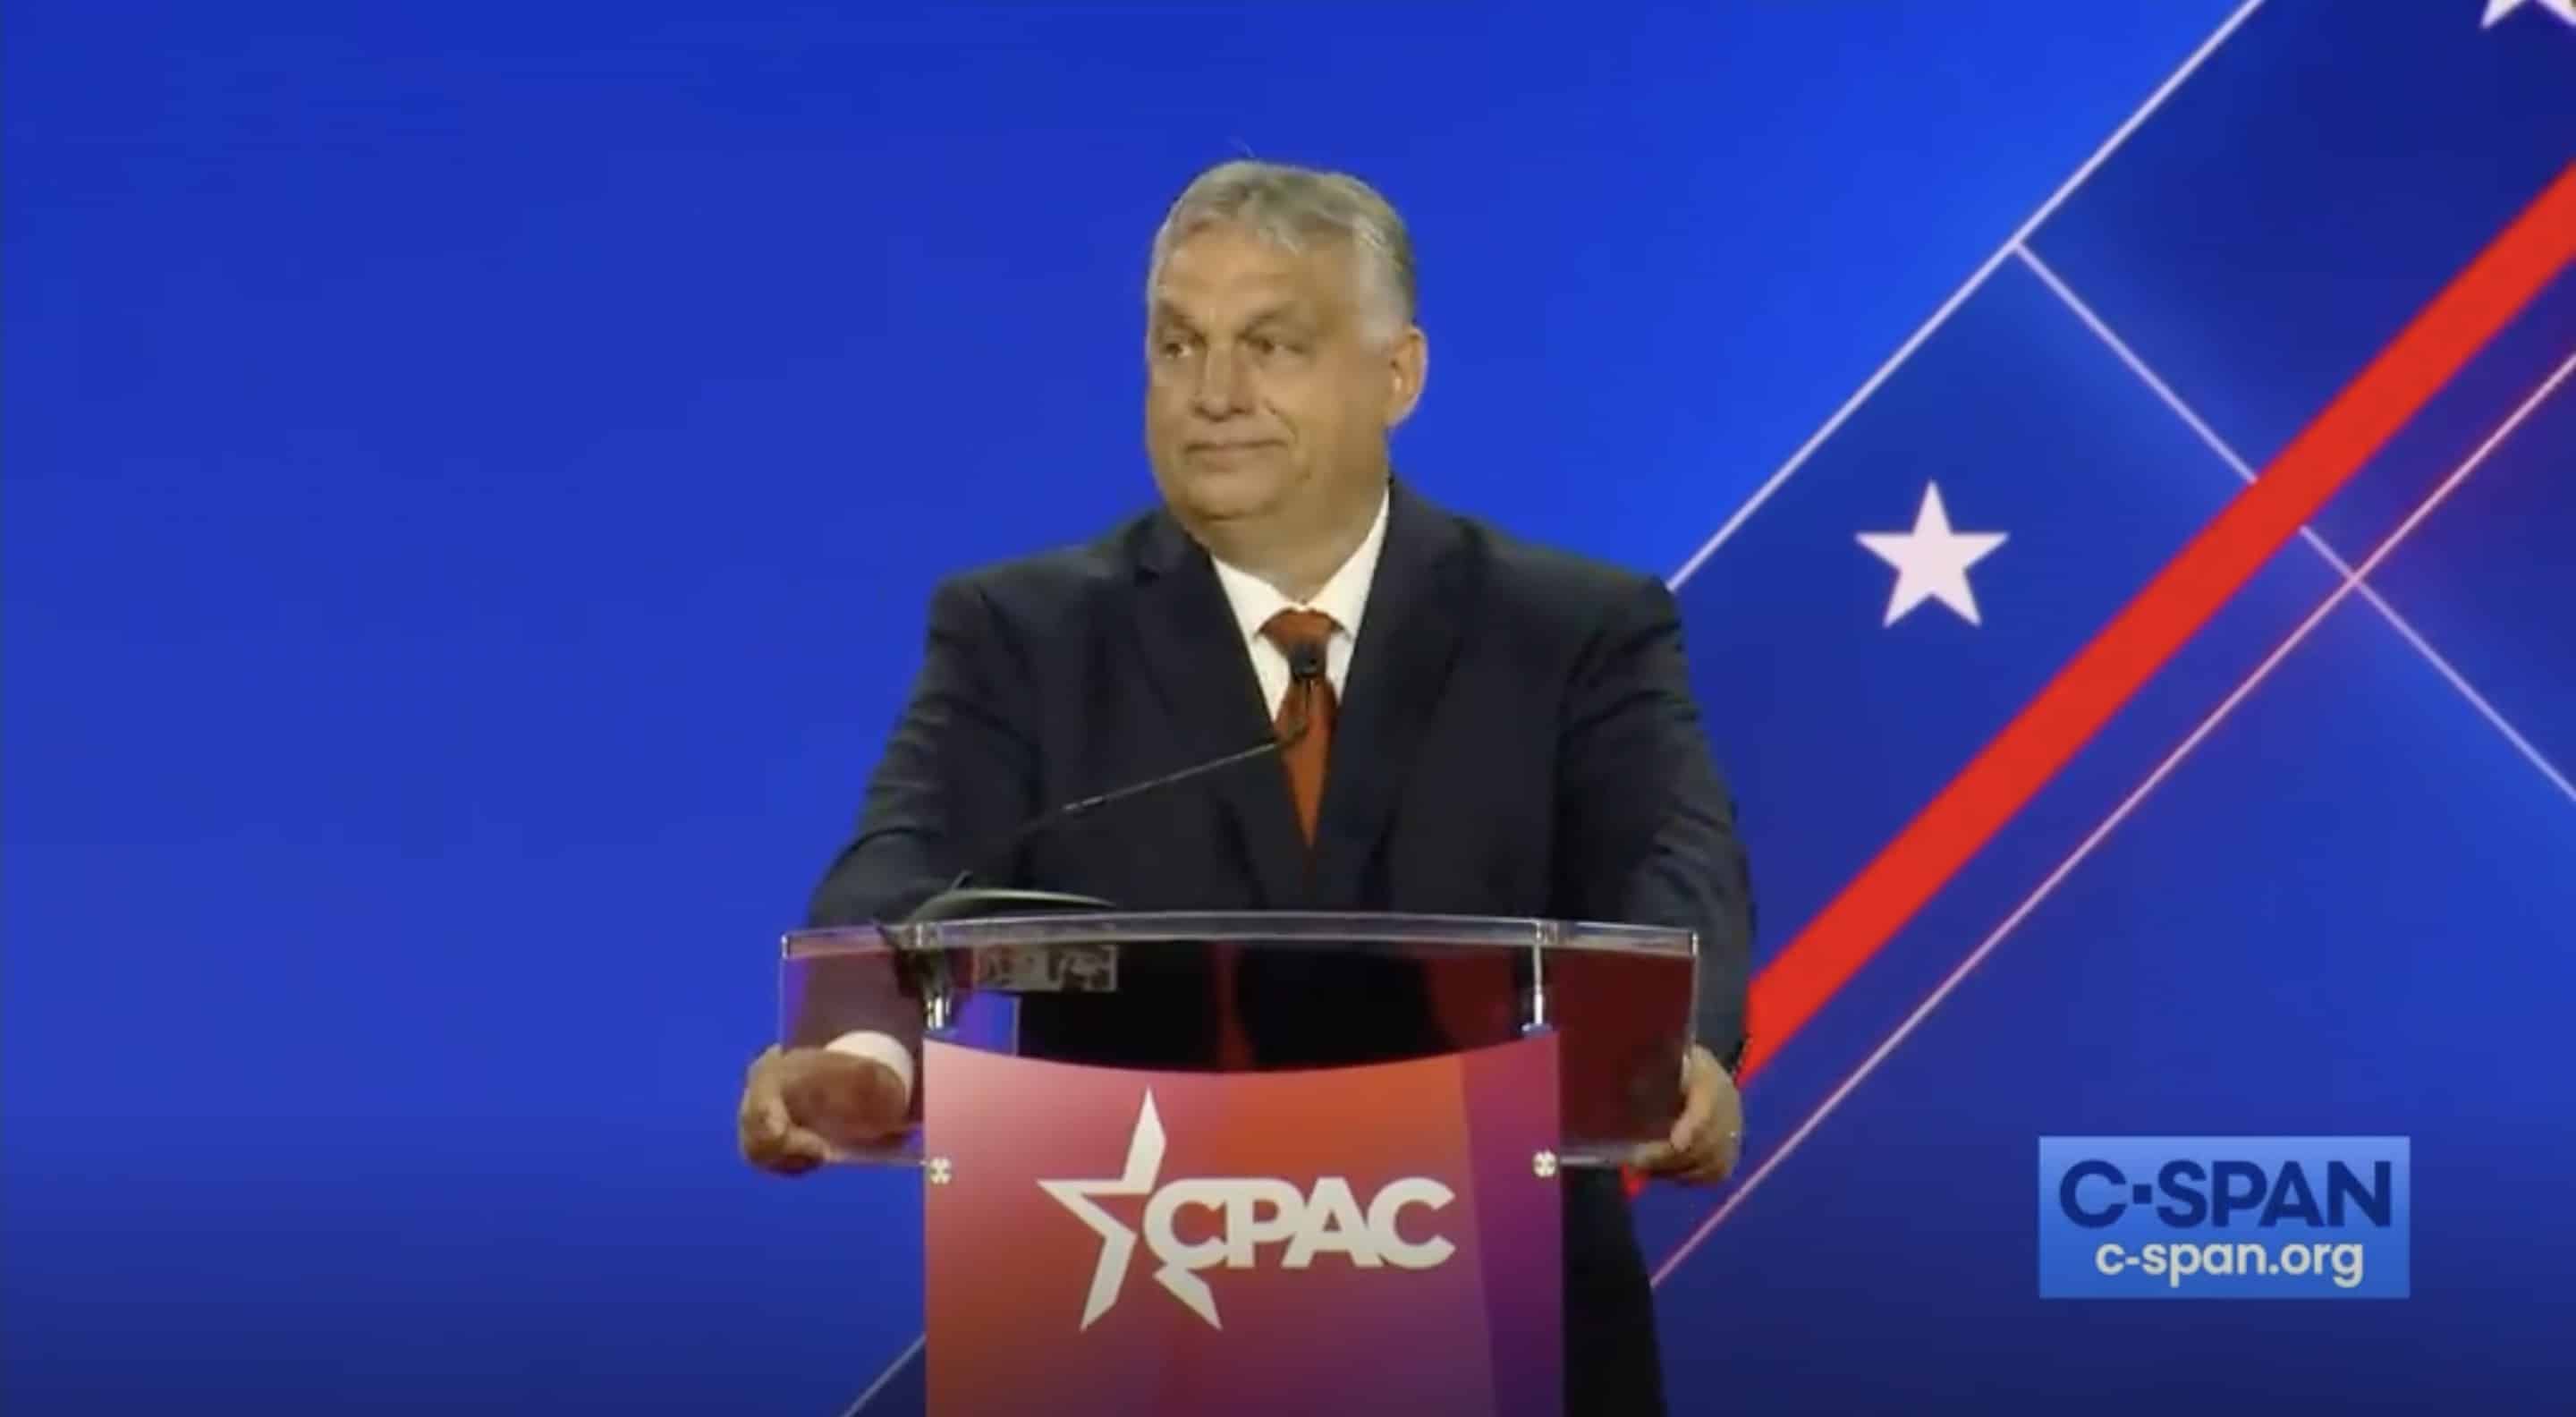 Warning of ‘total attack’ by progressives, Hungarian prime minister Viktor Orbán gives fiery speech at CPAC